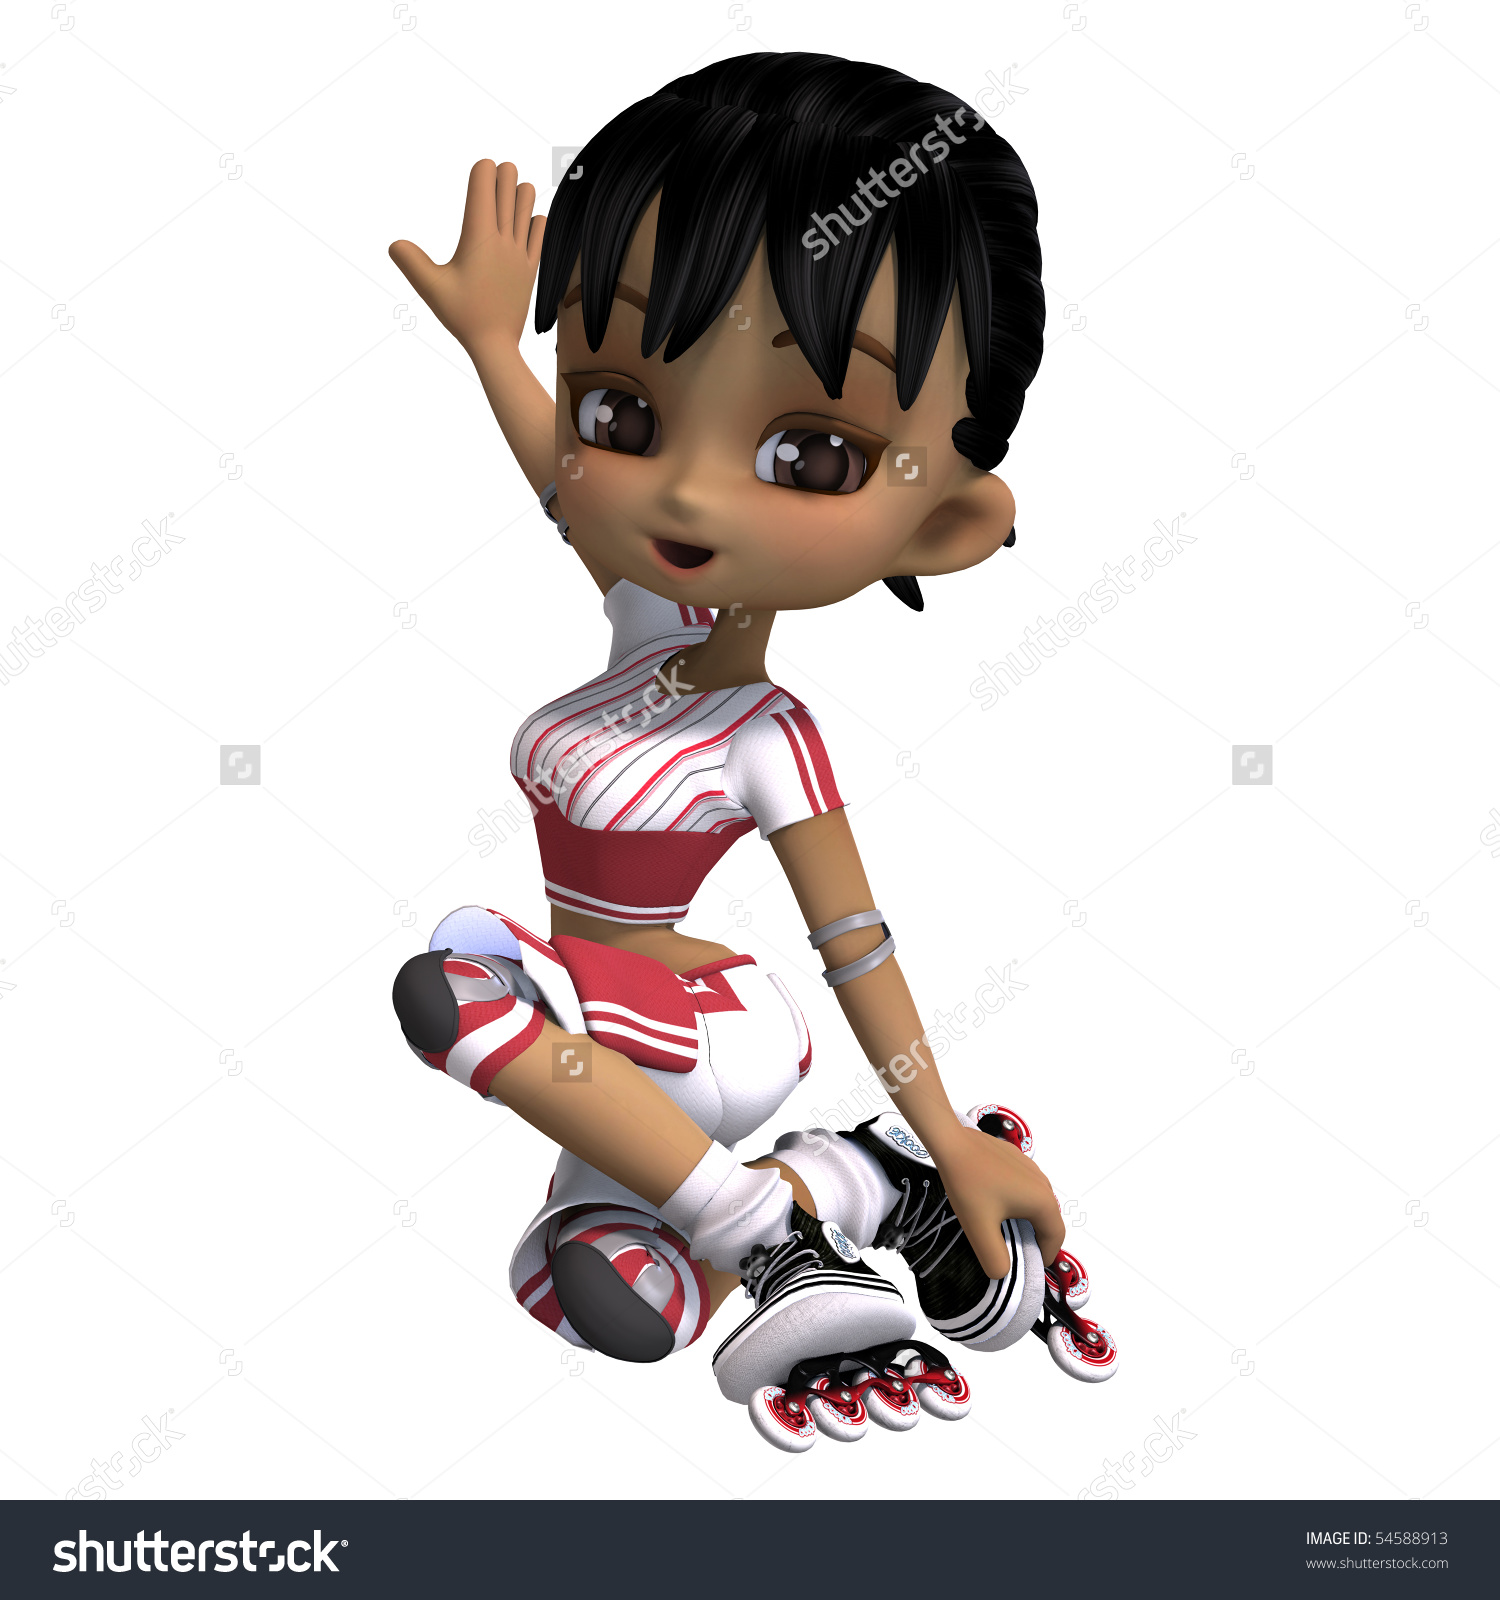 Cute Cartoon Girl With Inline Skates. 3d Rendering With Clipping.